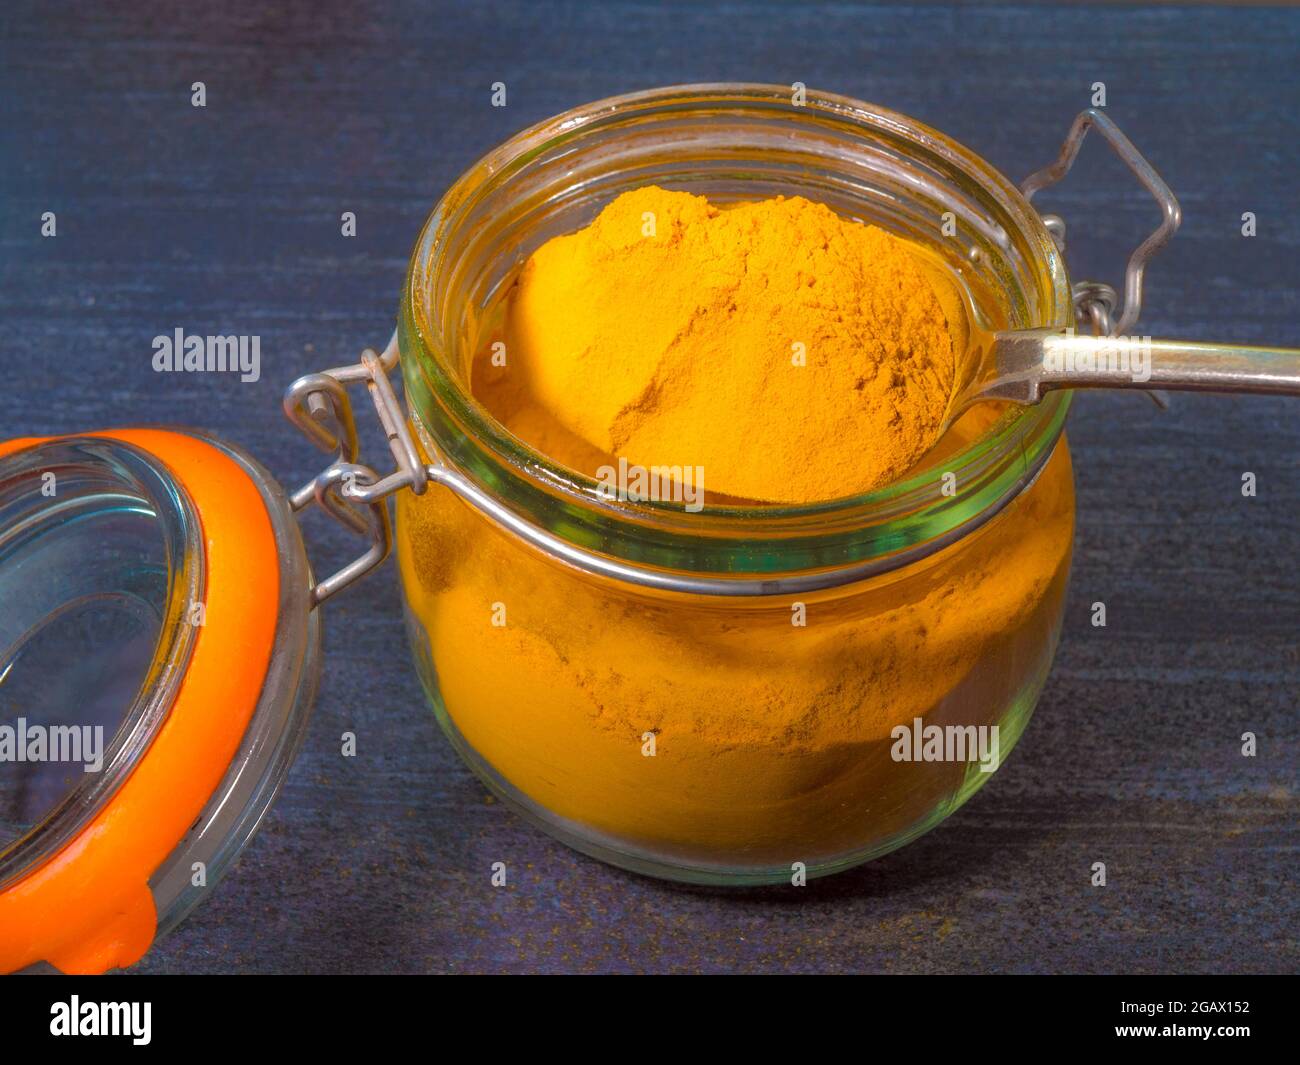 Closeup POV shot of a large spoonful of dry ground turmeric being lifted from a glass storage jar. Stock Photo